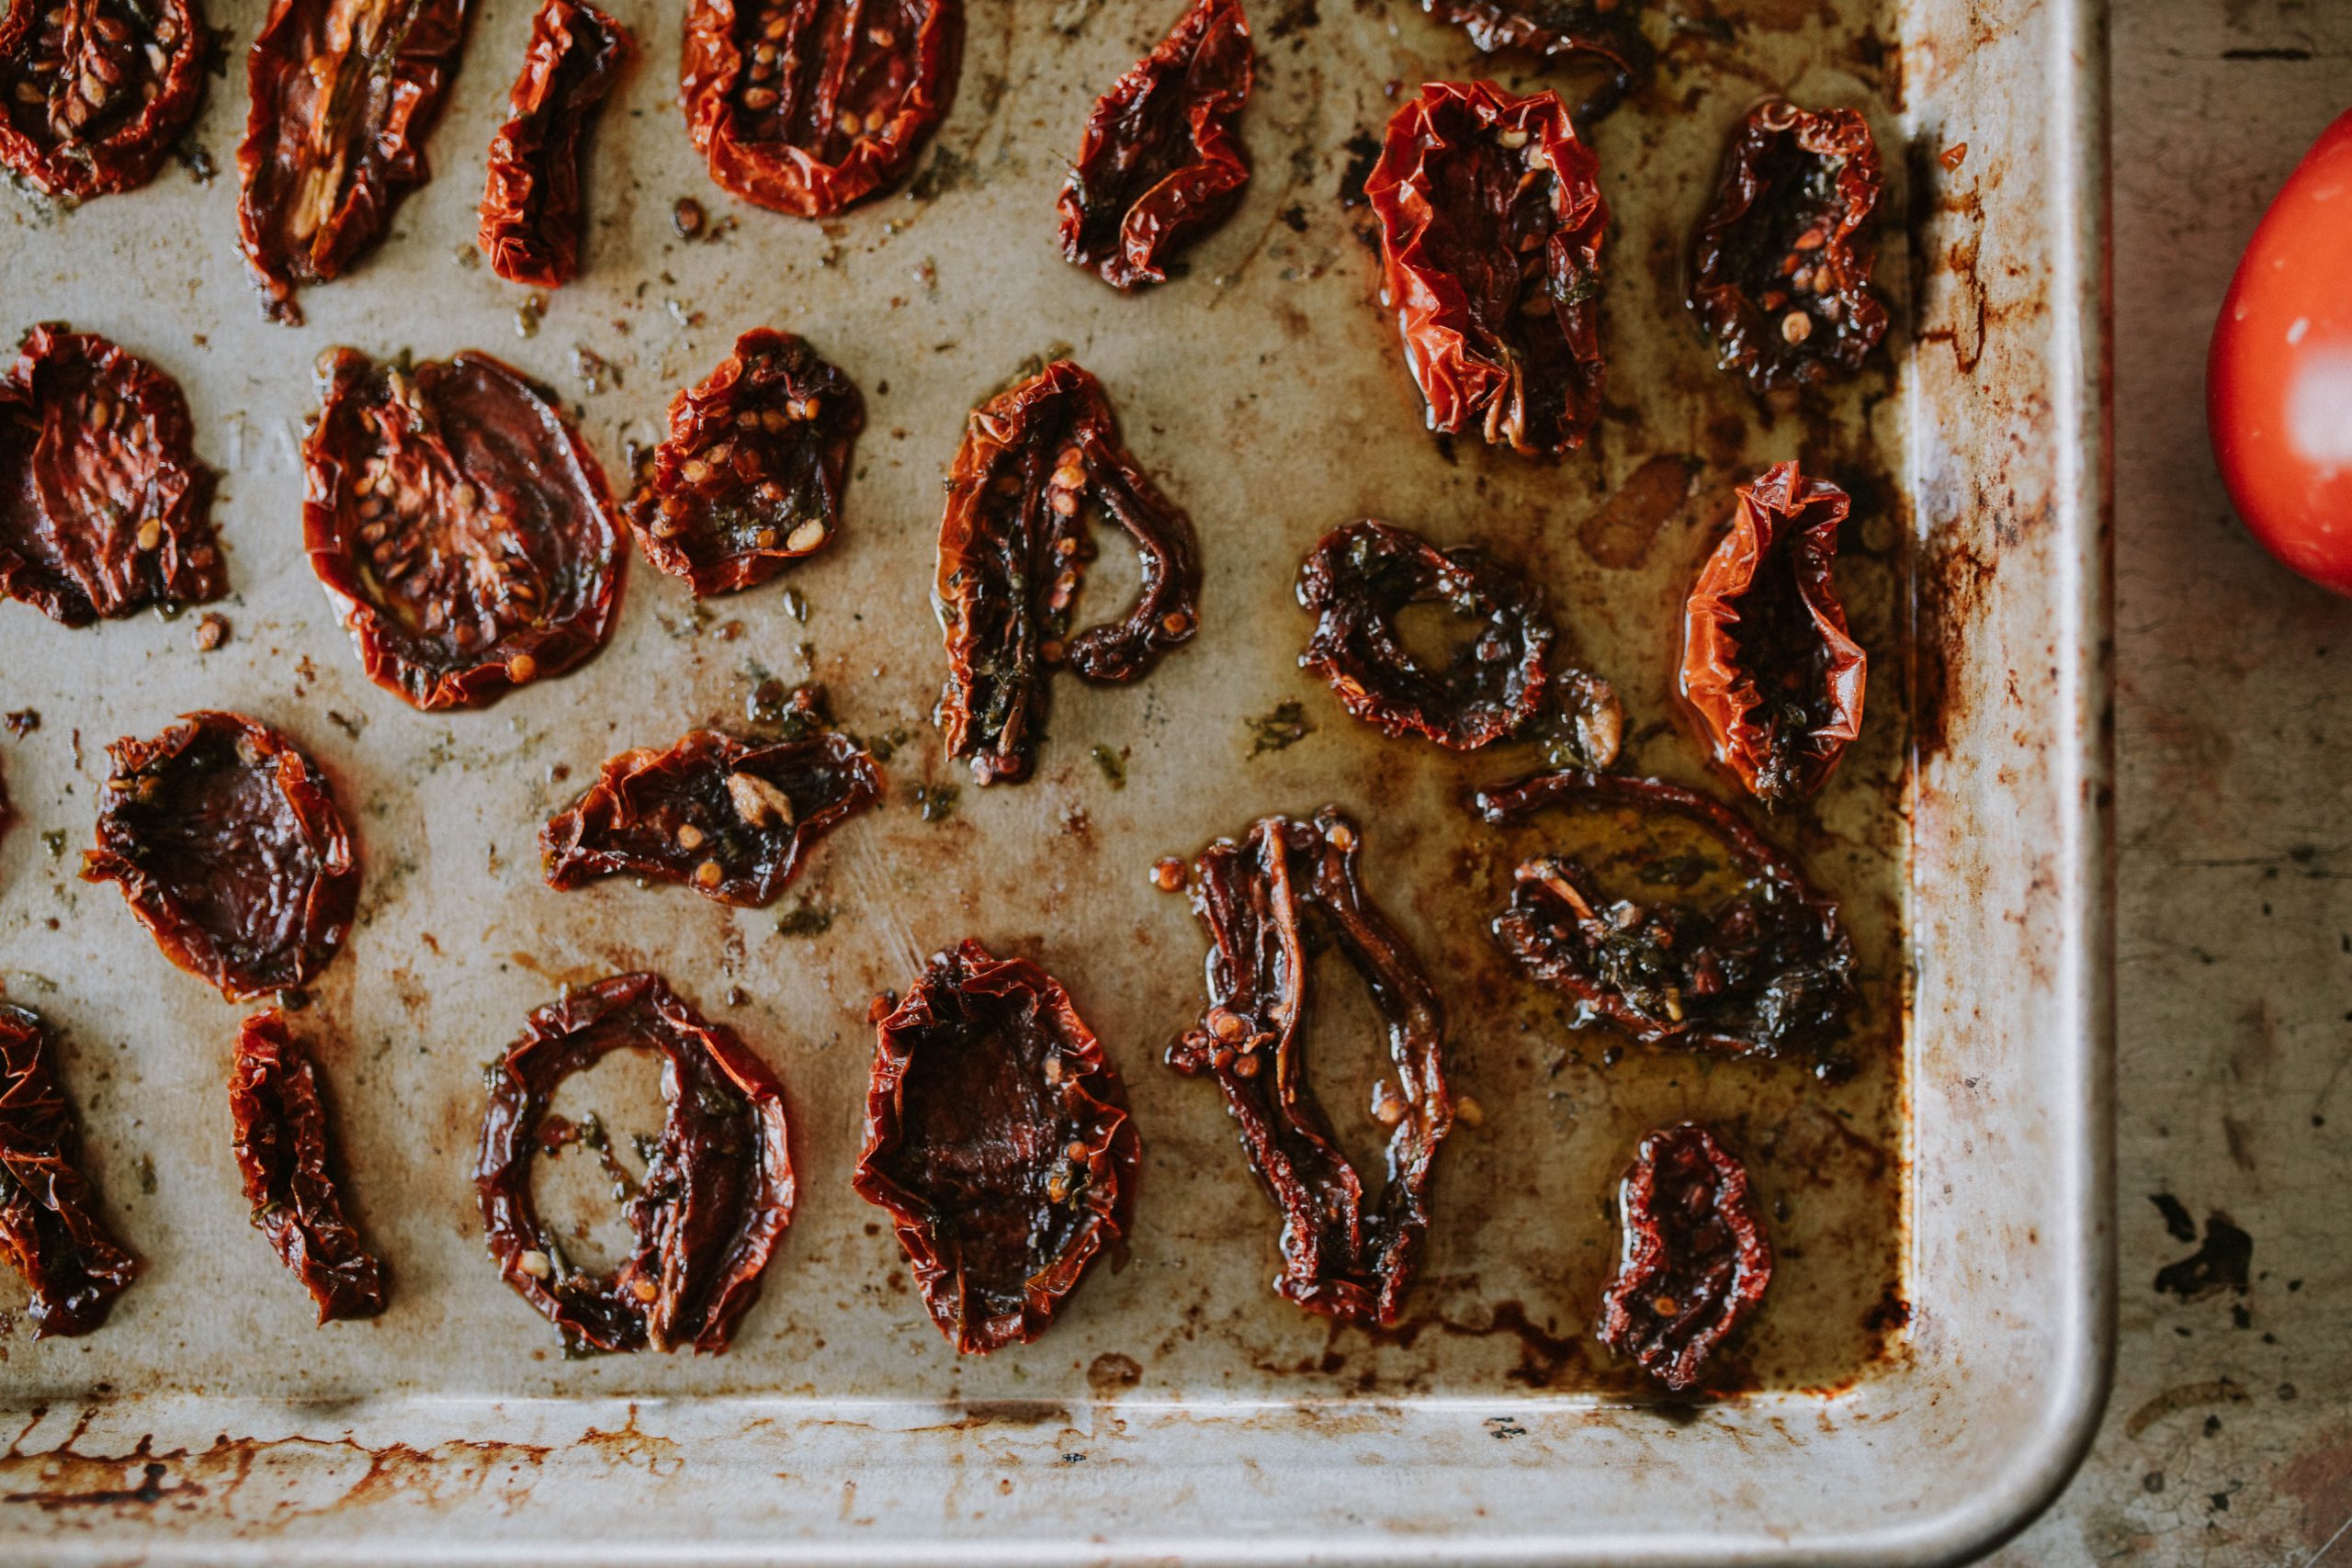 Marinated dehydrated Tomatoes